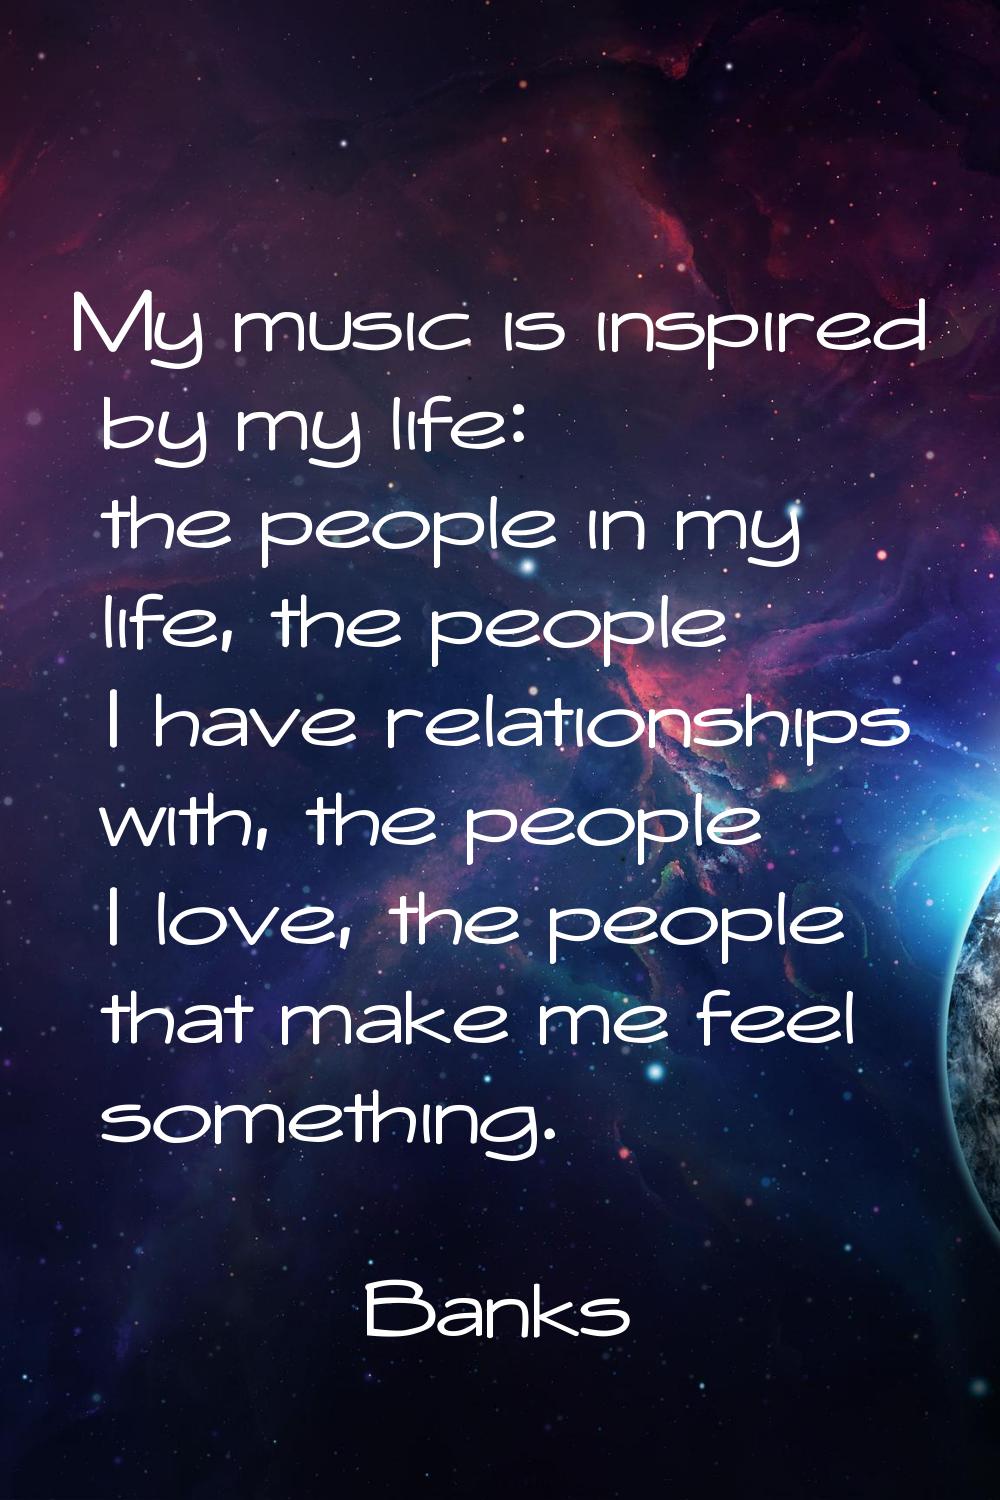 My music is inspired by my life: the people in my life, the people I have relationships with, the p